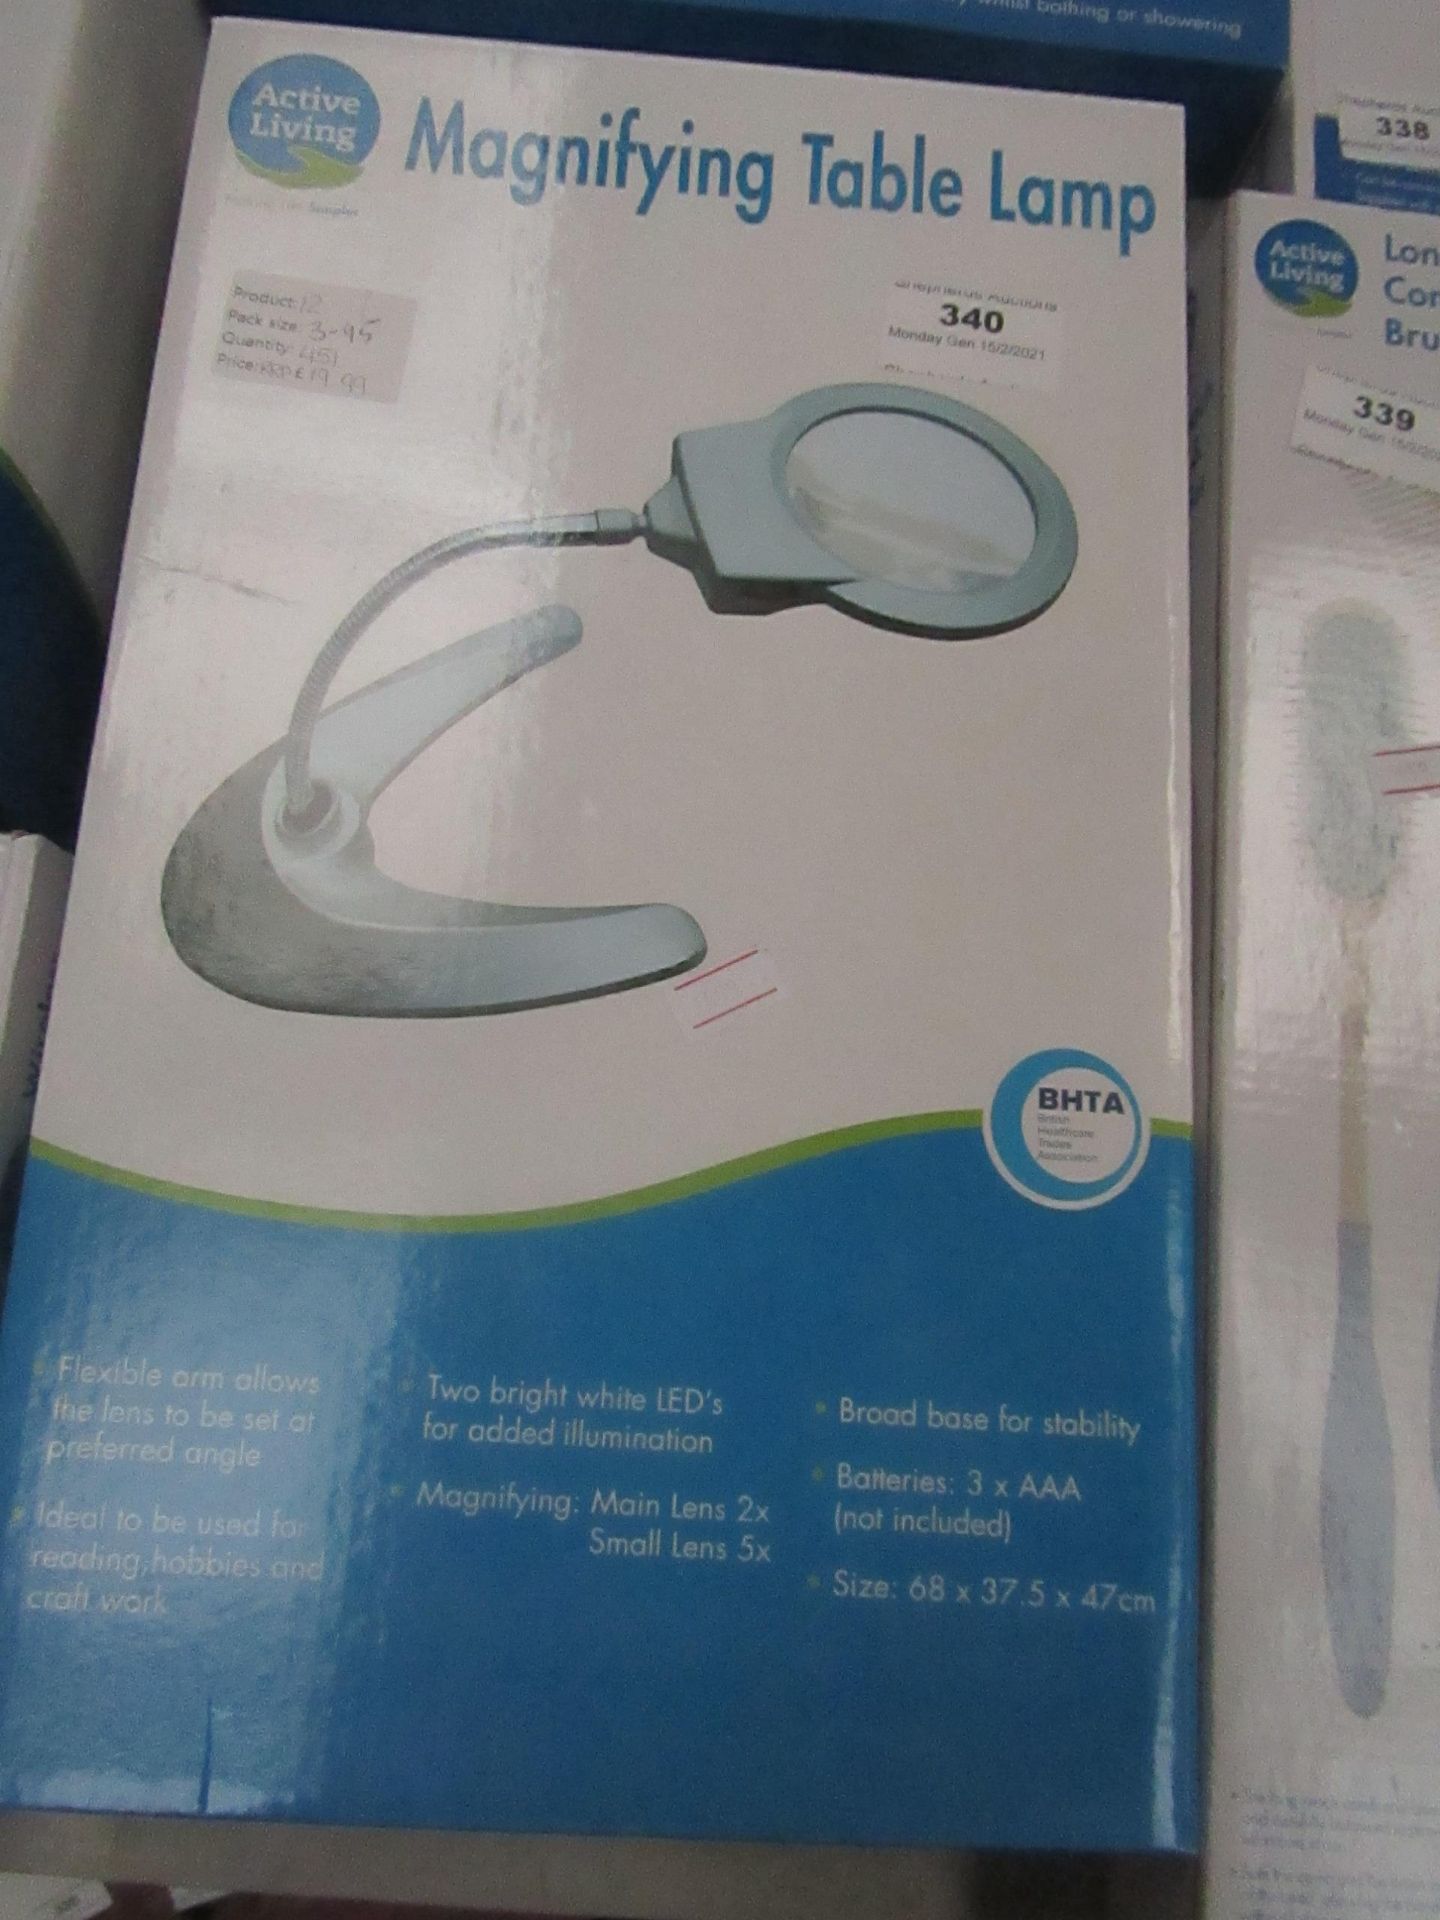 Active Living - Magnifying Table Lamp - Unchecked & Boxed.